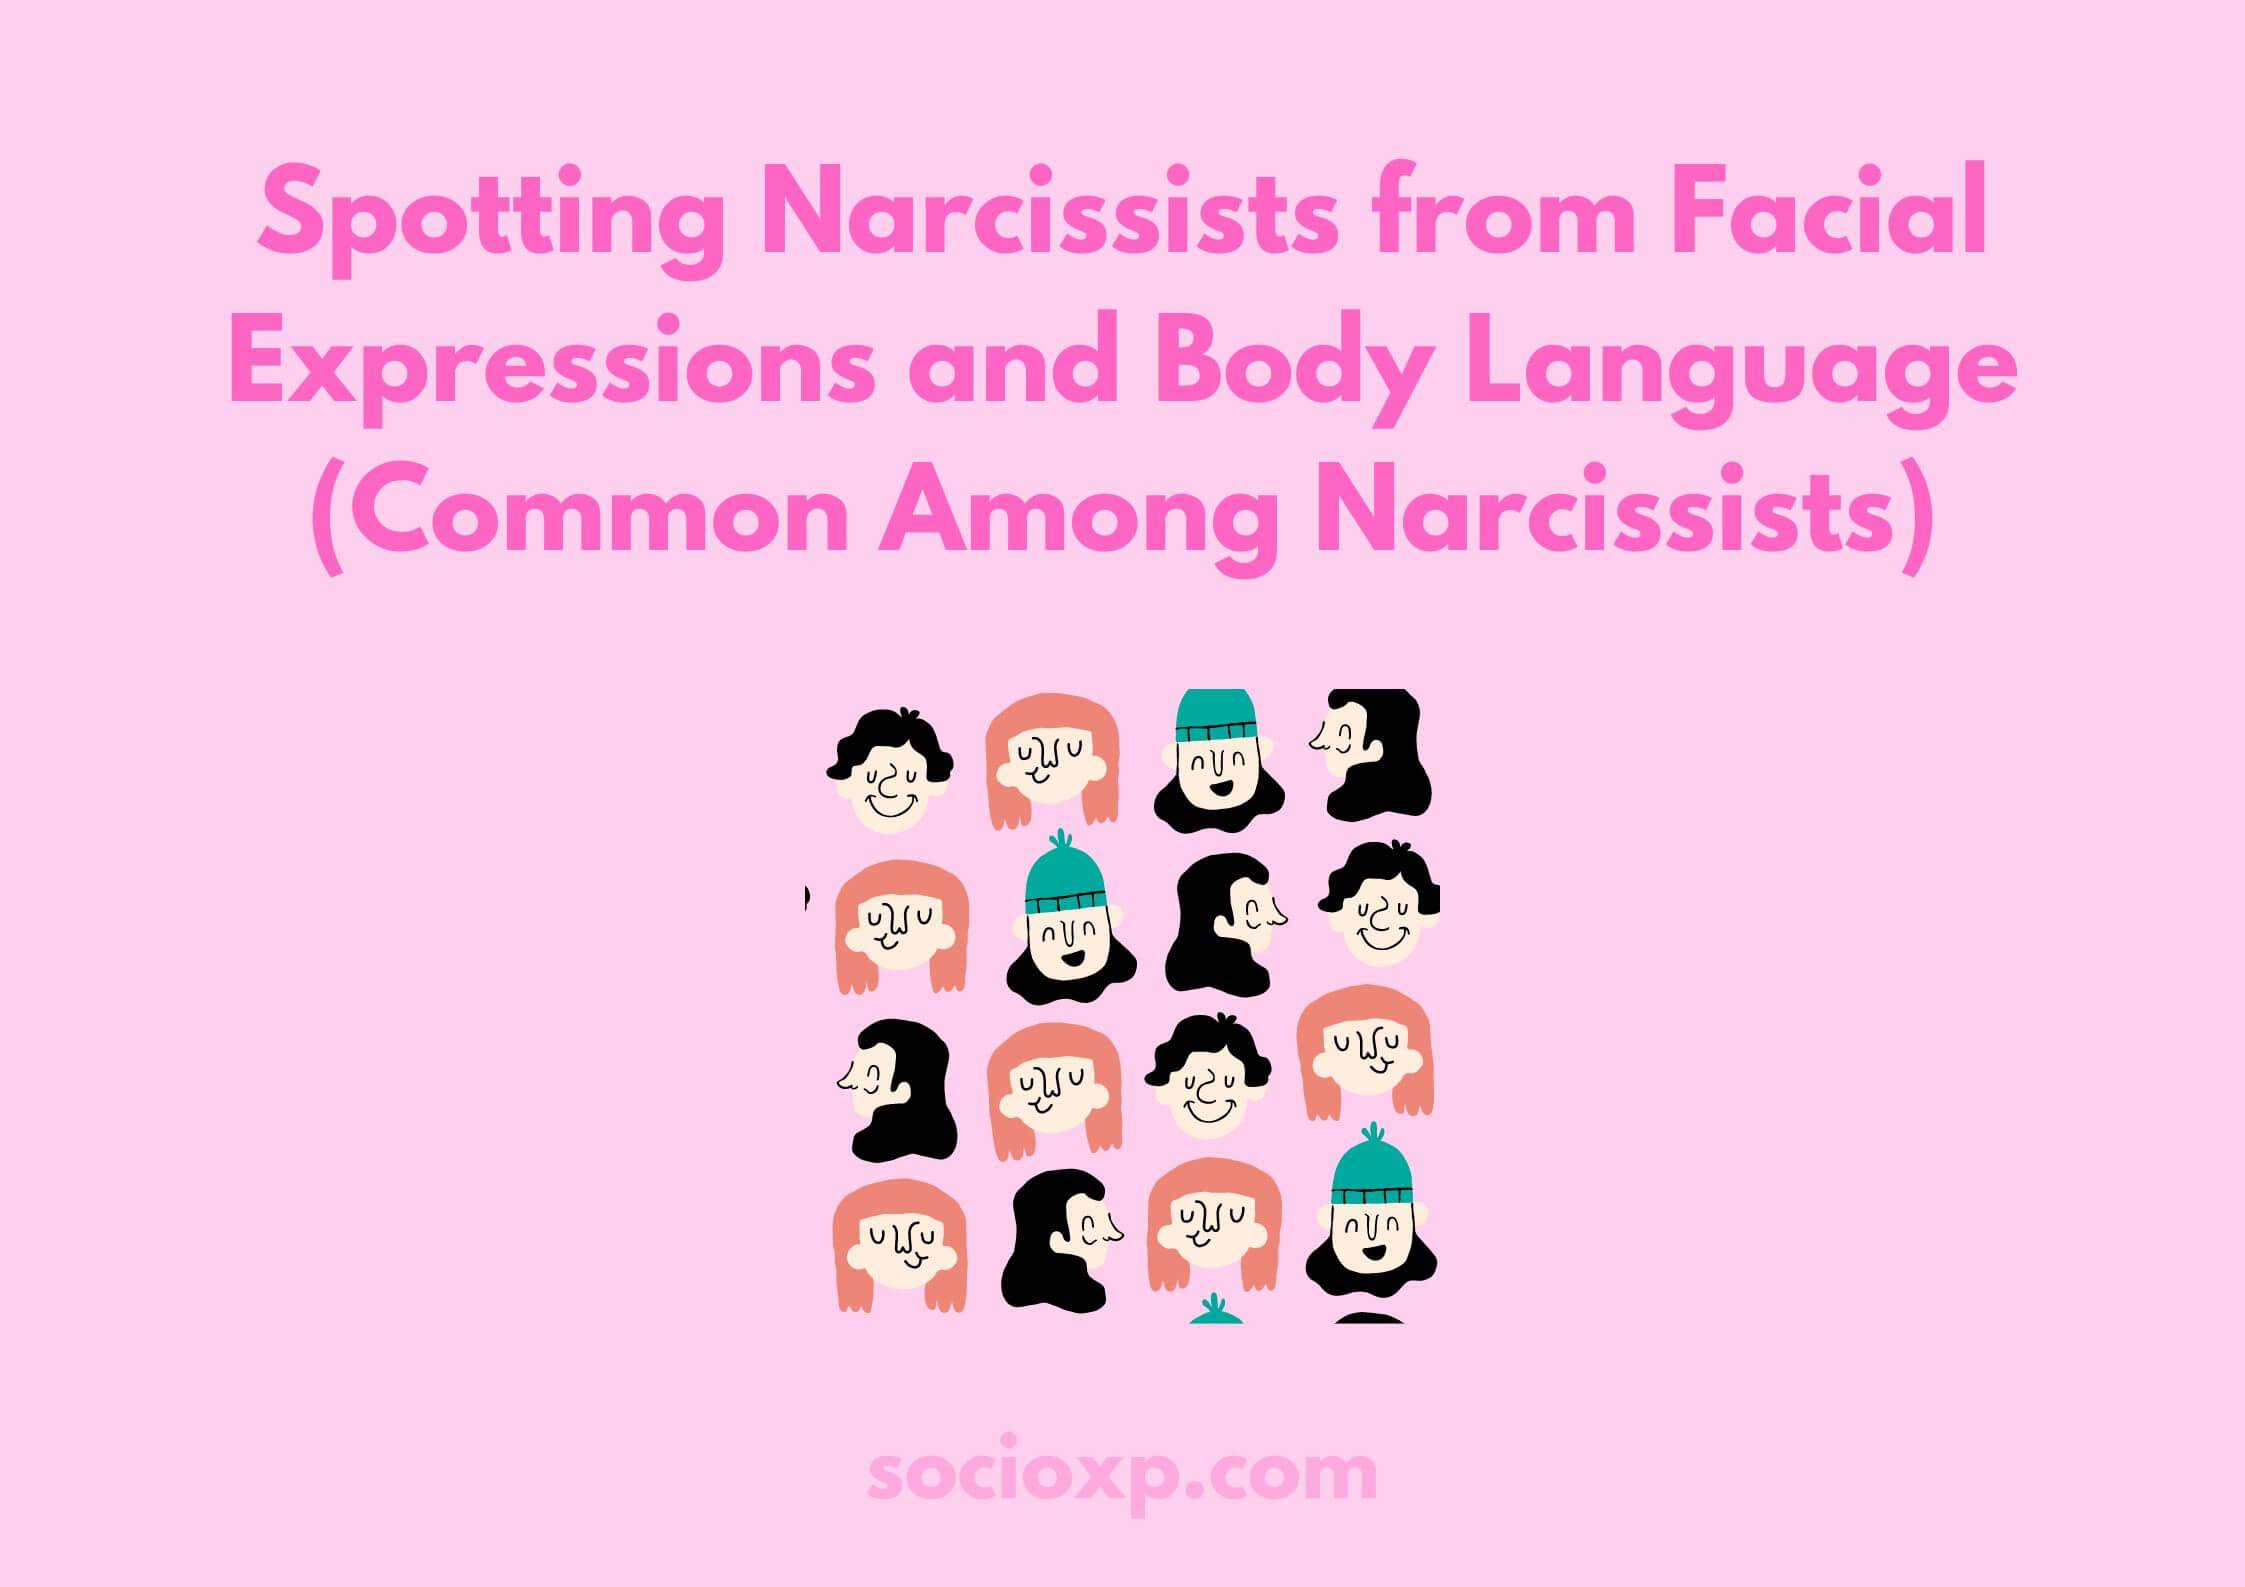 Spotting Narcissists from Facial Expressions and Body Language (Common Among Narcissists)